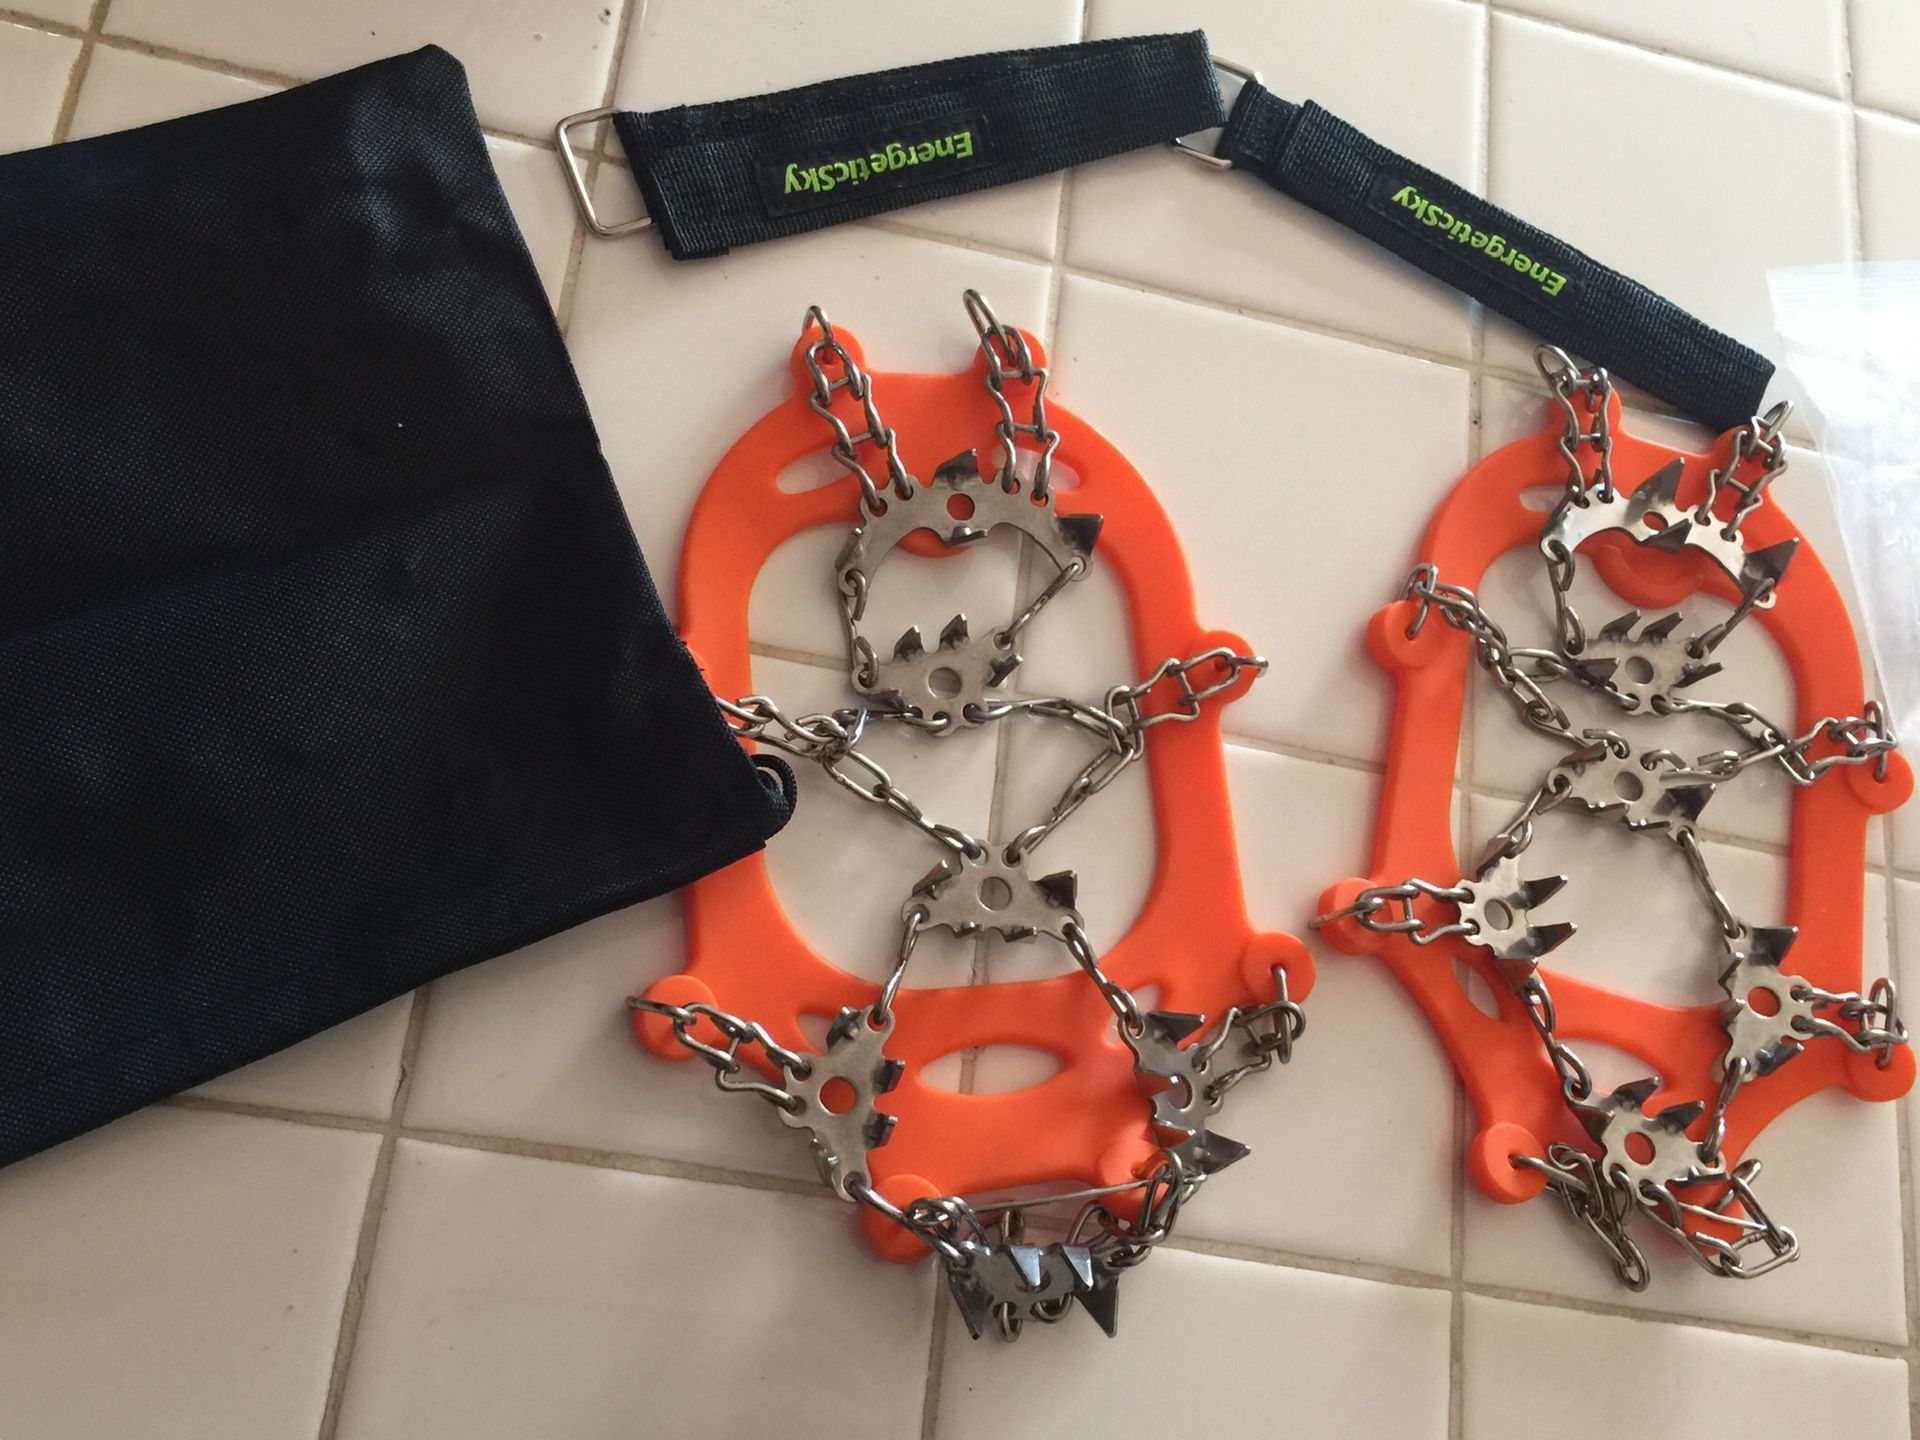 Brand new CRAMPONS for hiking fishing climbing. Size M. Easy to use. Pick up only. In Corona